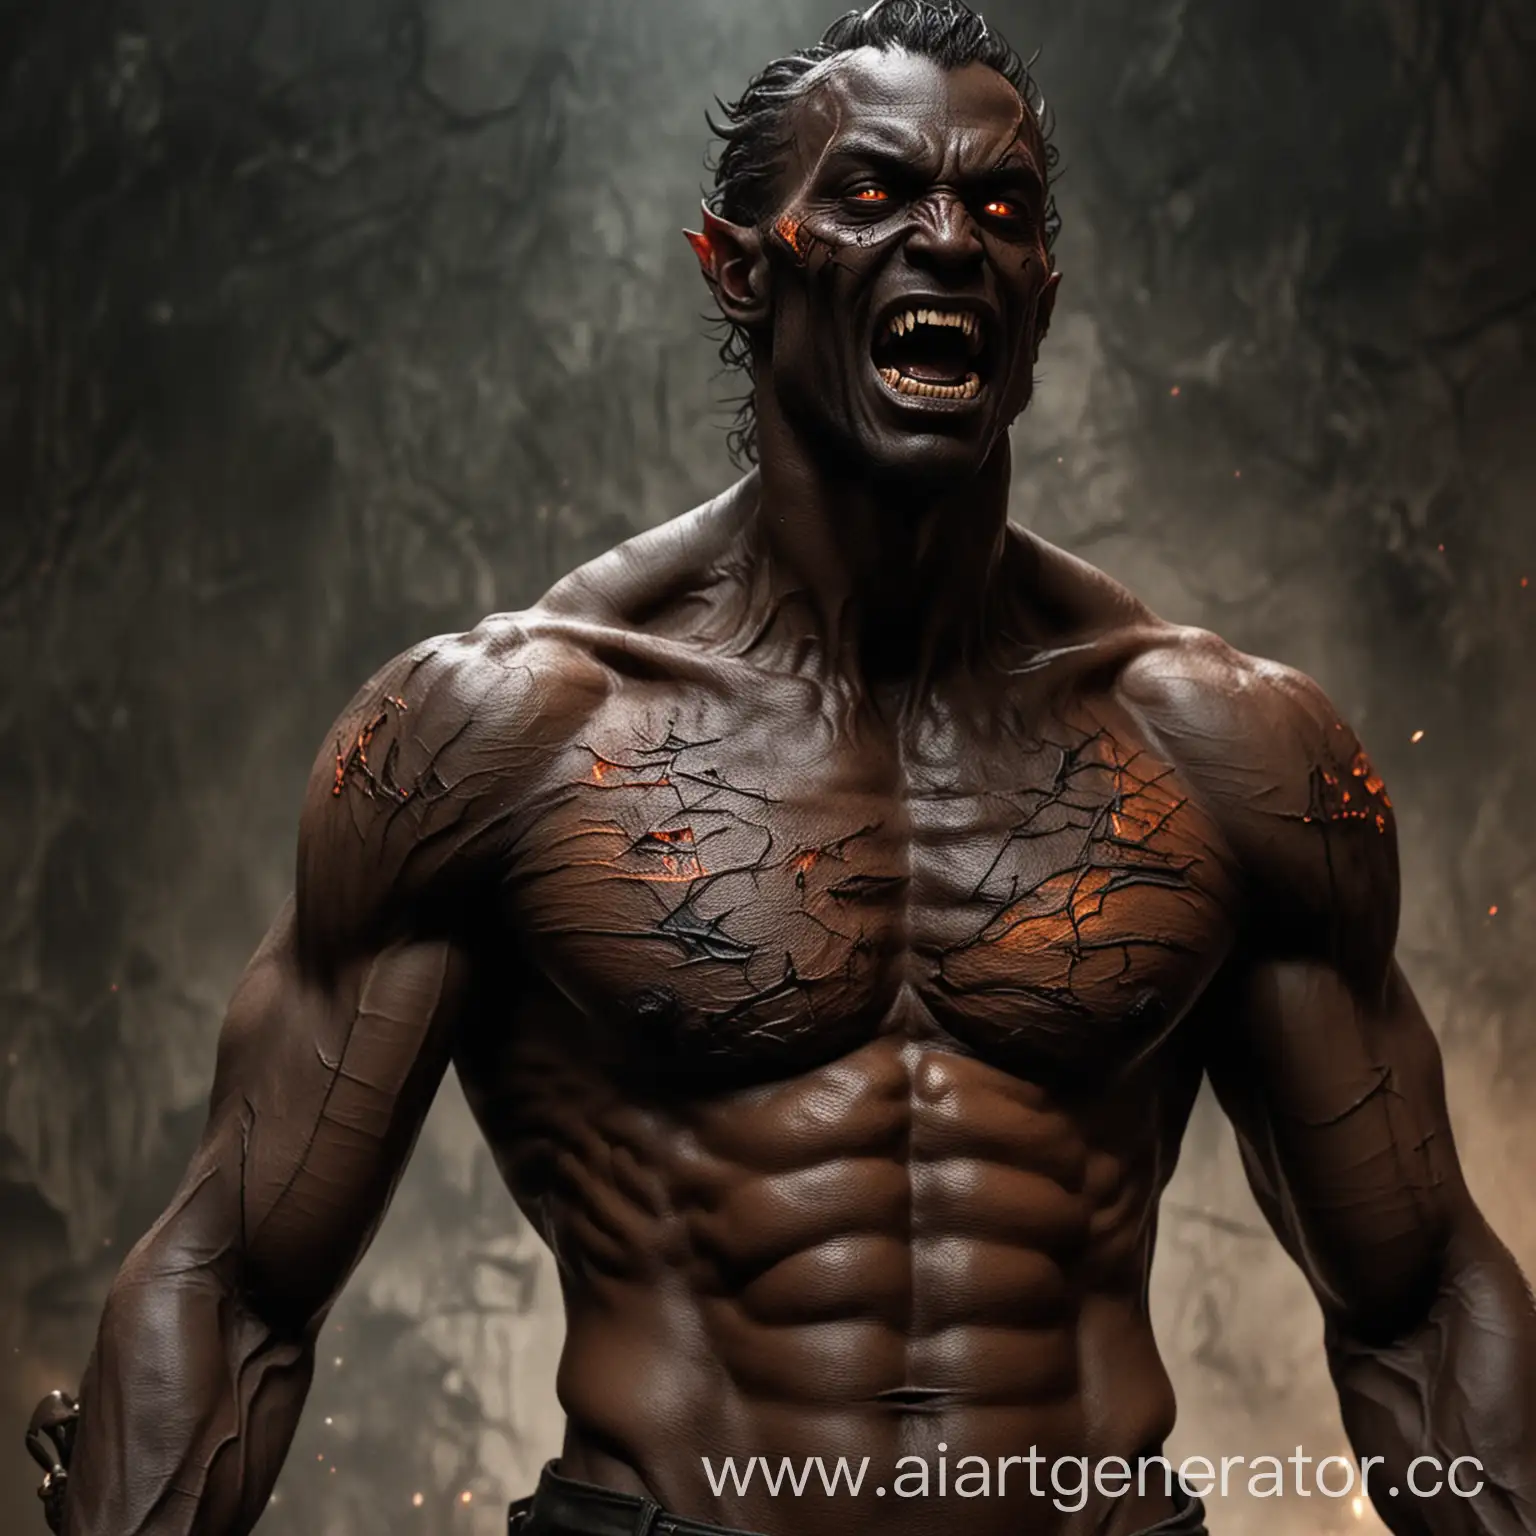 *Valzoth clears his throat before describing himself.*  I look like what most people would image a demon to be. Tall and lean, with black skin, no shirt, and black skin tight pants. I have a muscular build, and my eyes glow a bright orange like the pits of Hell. My body is toned everywhere, and my teeth are sharp and deadly. I have a single scar across my chest, a memento of a great war from back in Hell.